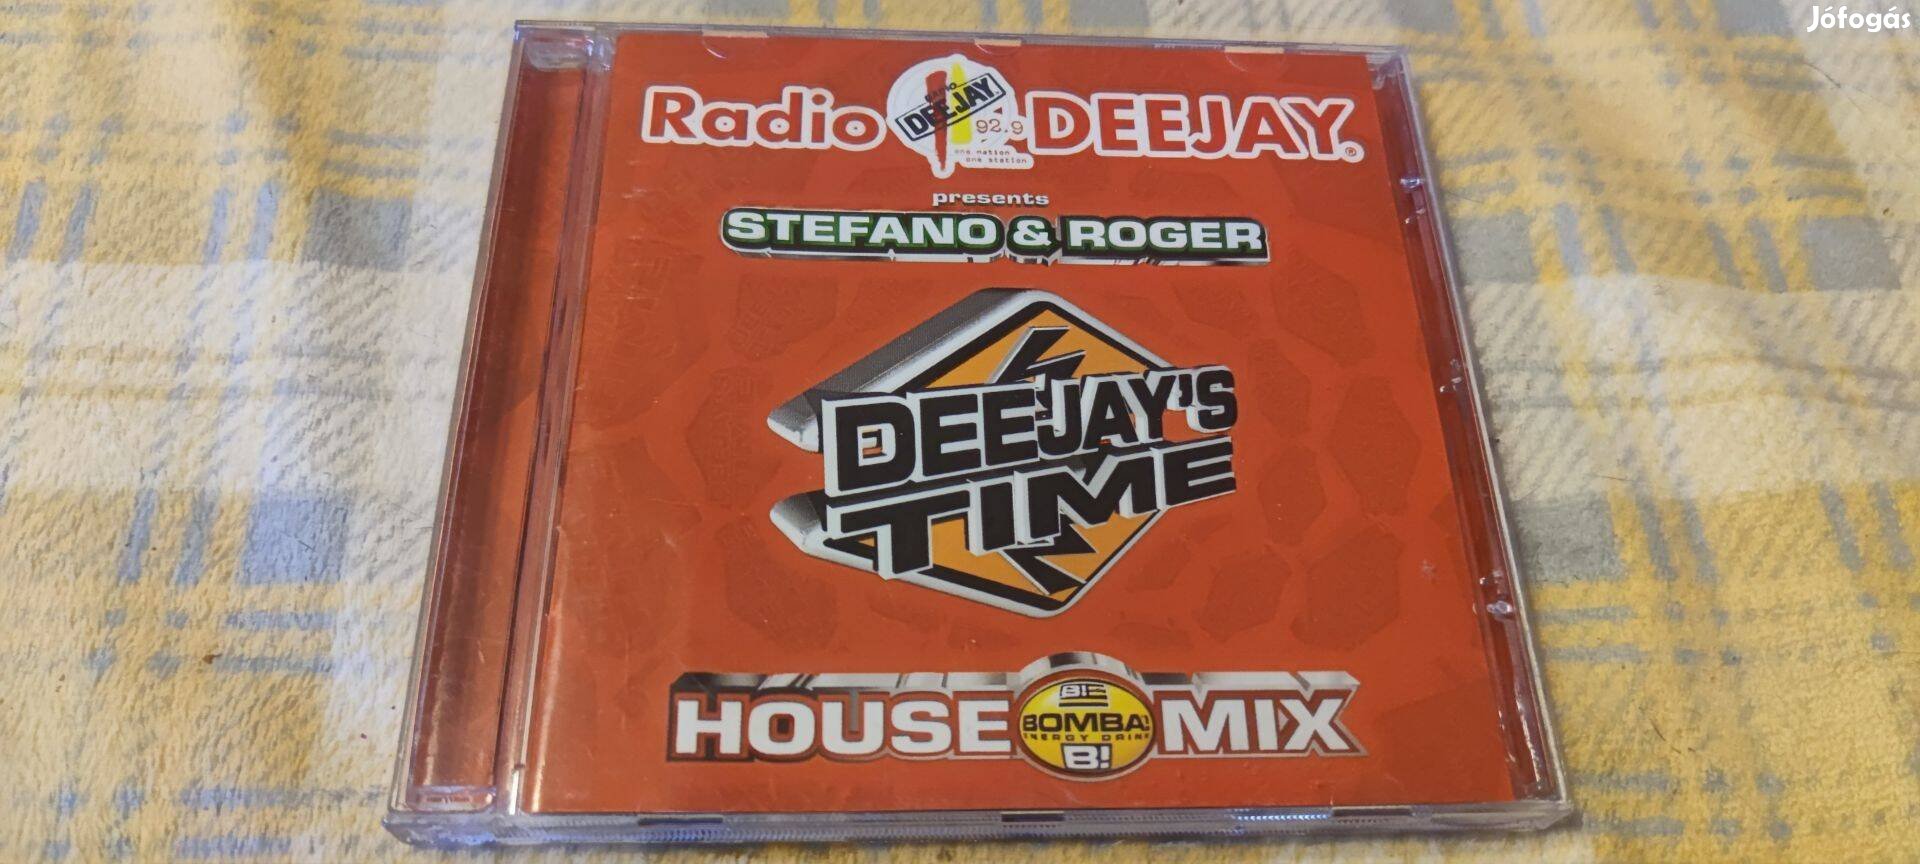 Stefano & Roger - Deejay's Time 2001 CD